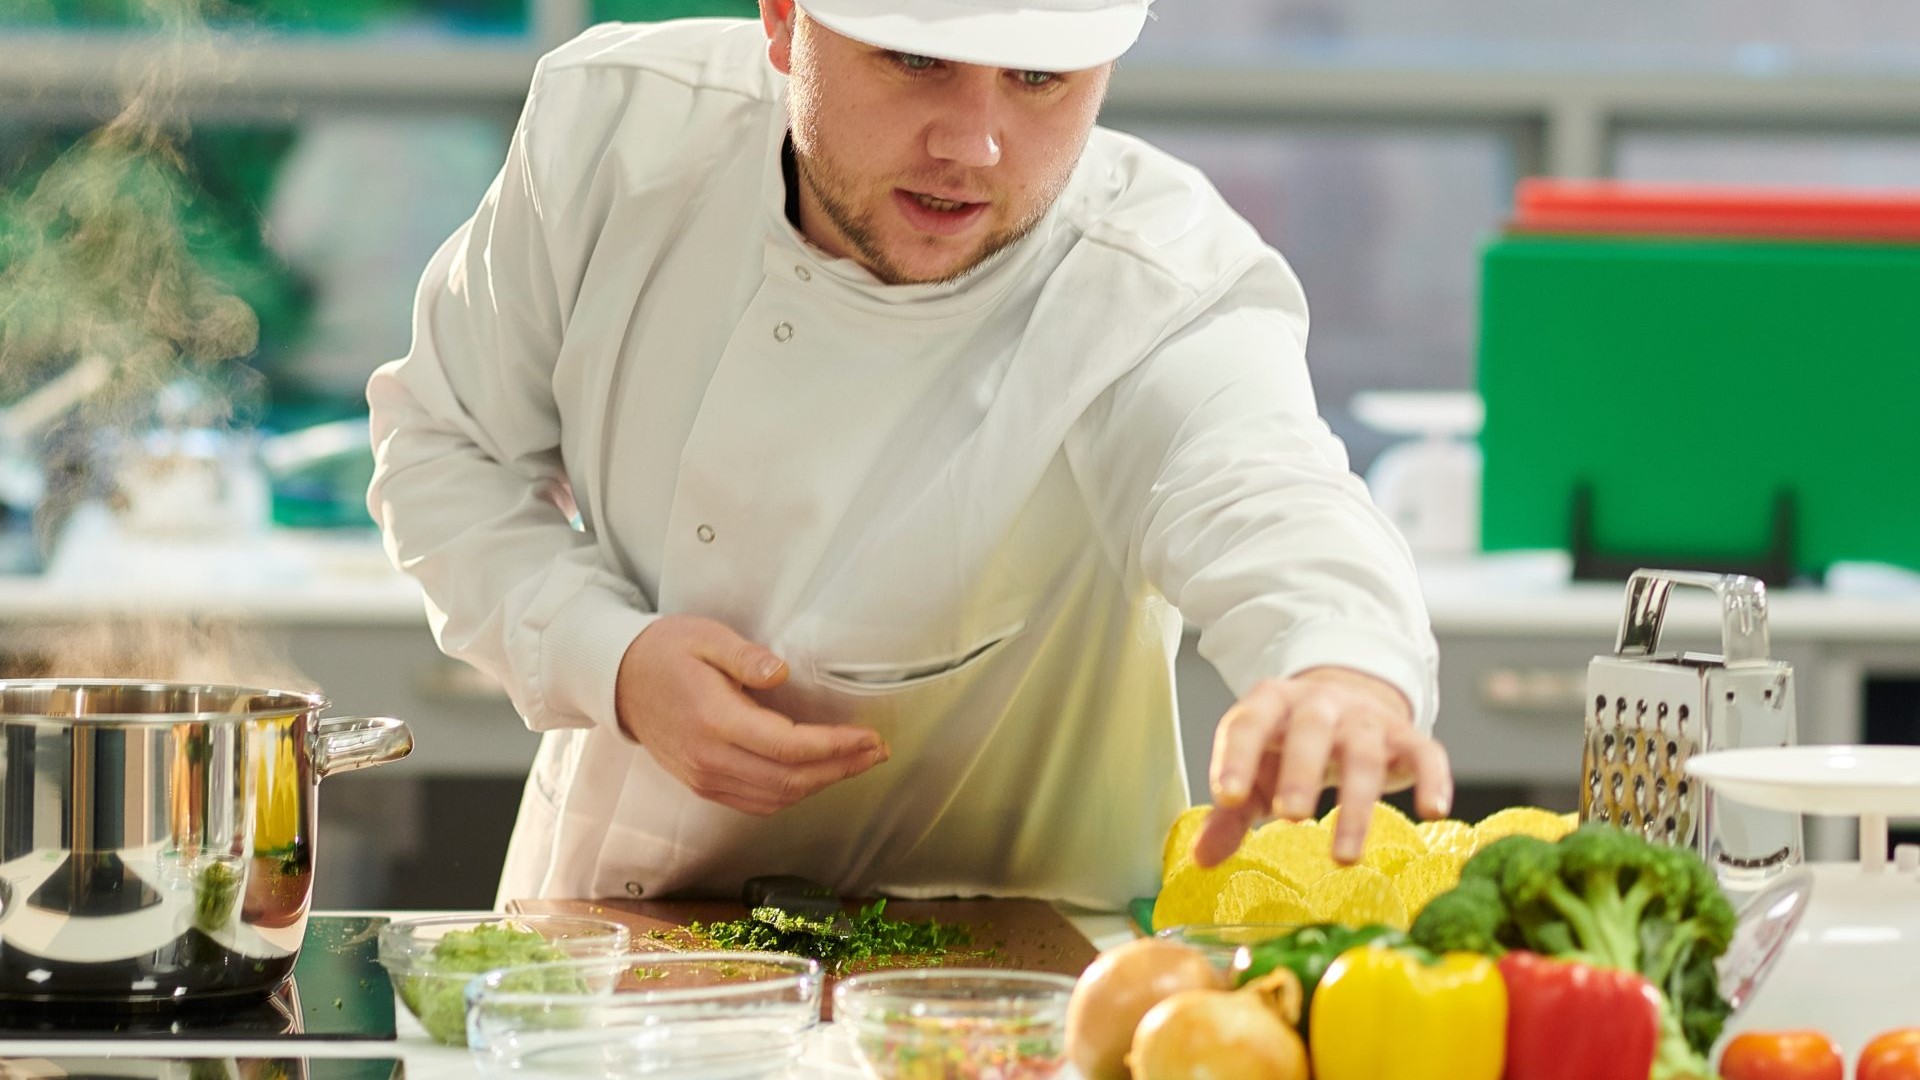 A chef handling and preparing multiple different fruits and vegetables on a counter.